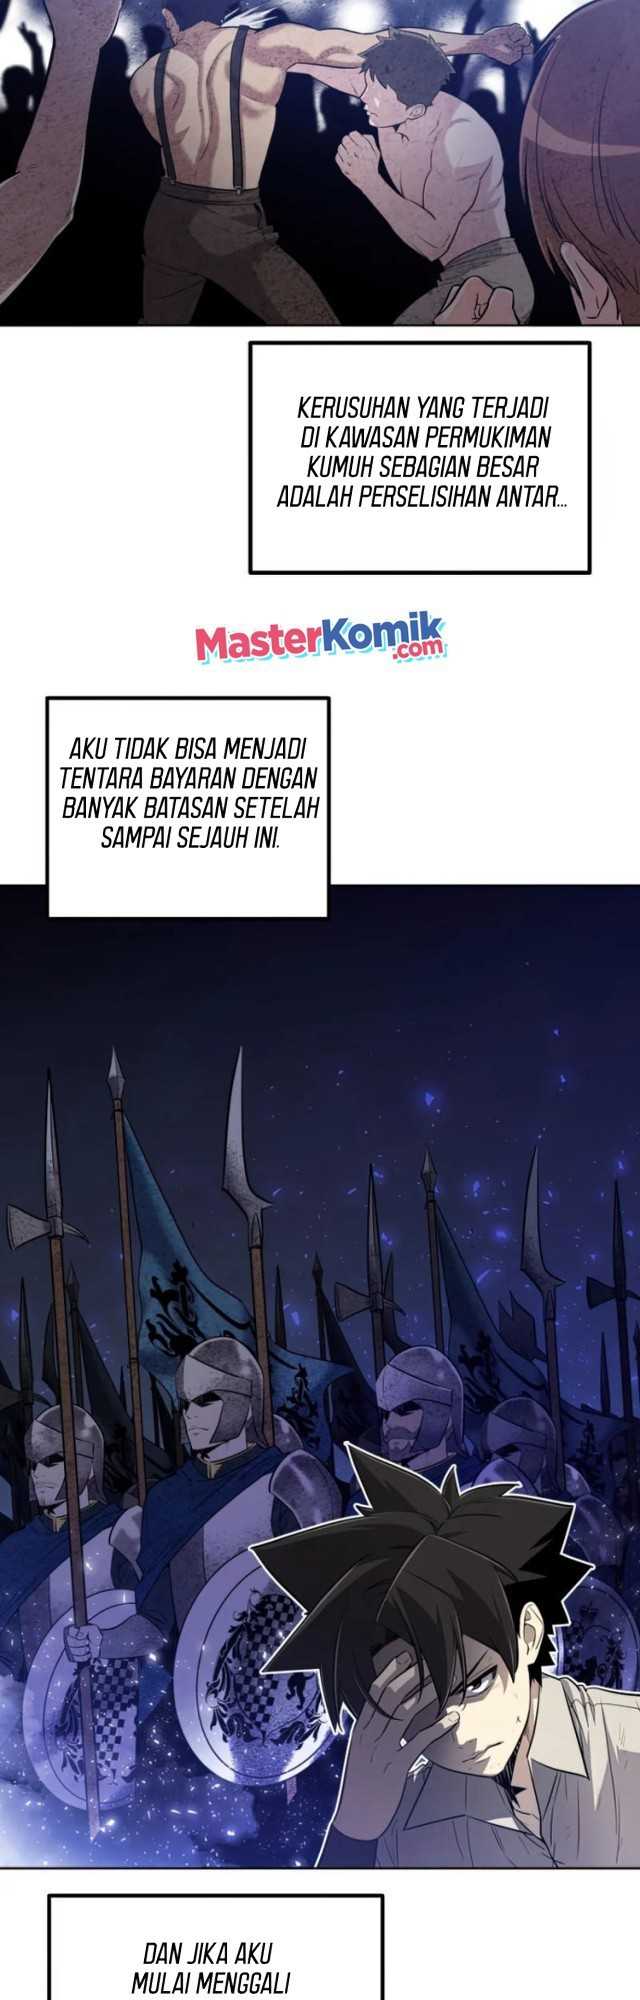 Overpowered Sword Chapter 21